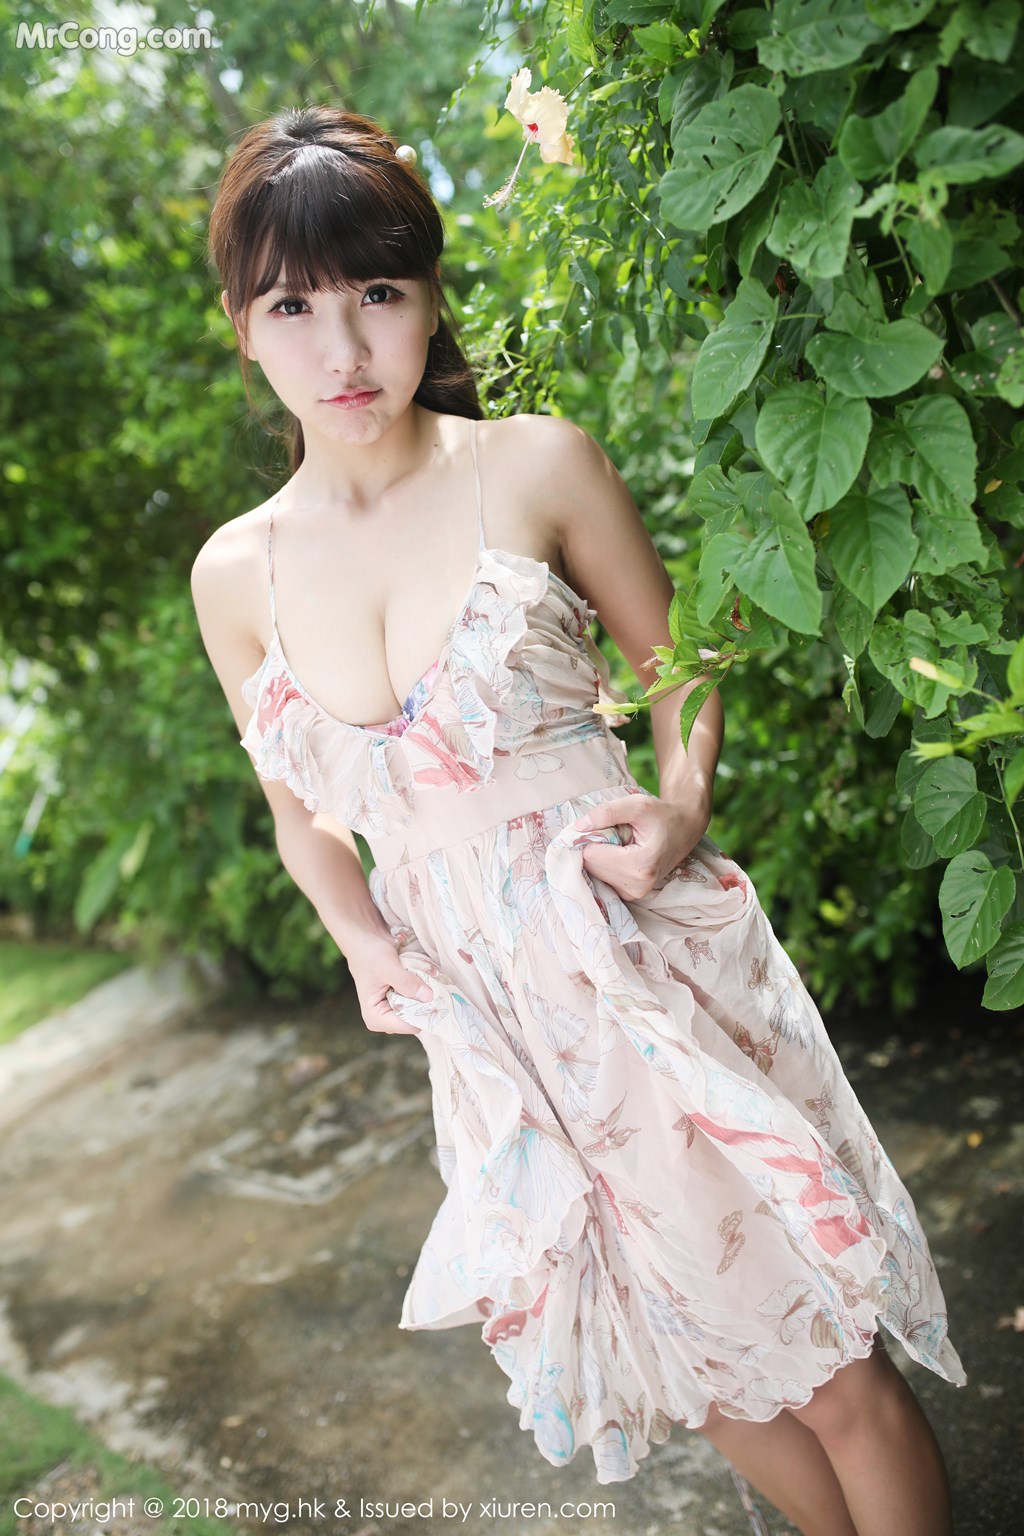 MyGirl Vol.276: Sunny Model (晓 茜) (66 pictures) photo 2-8